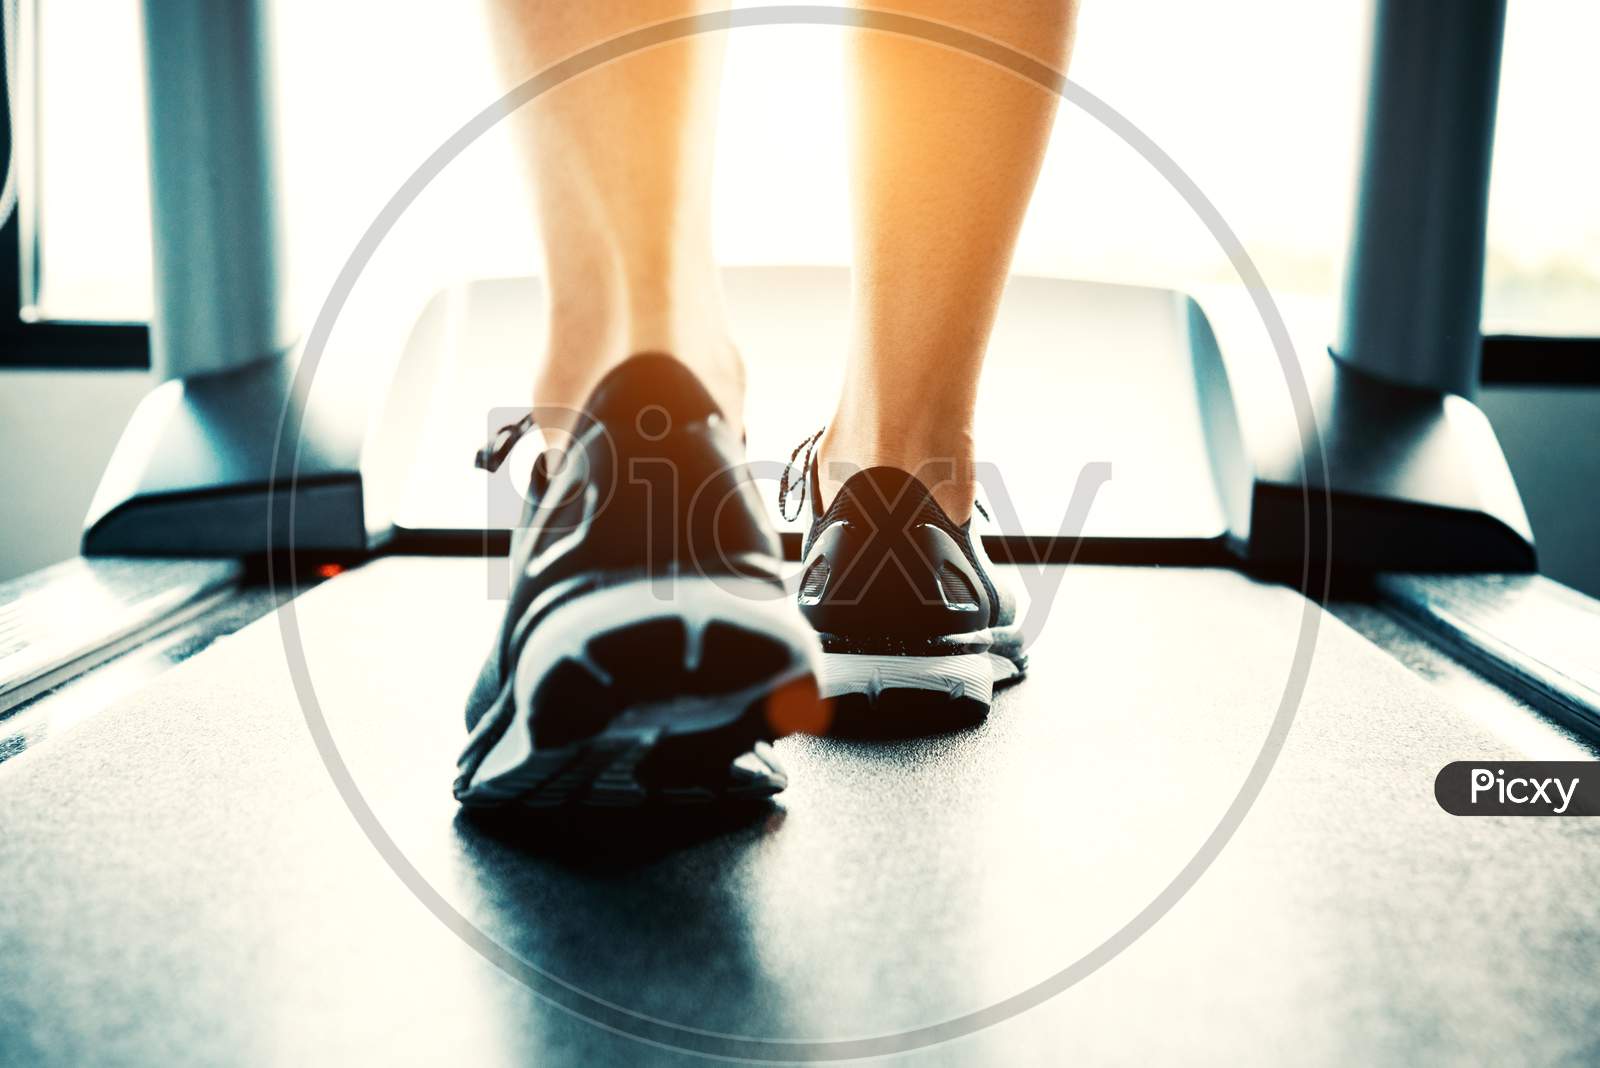 Close Up Of People Who Exercising On Treadmill. Close-Up Of Woman Legs Walking By Treadmill In Sports Club. Fitness And Body Build Up Concept. Workout And Strength Training Concept. Sport Club Theme.